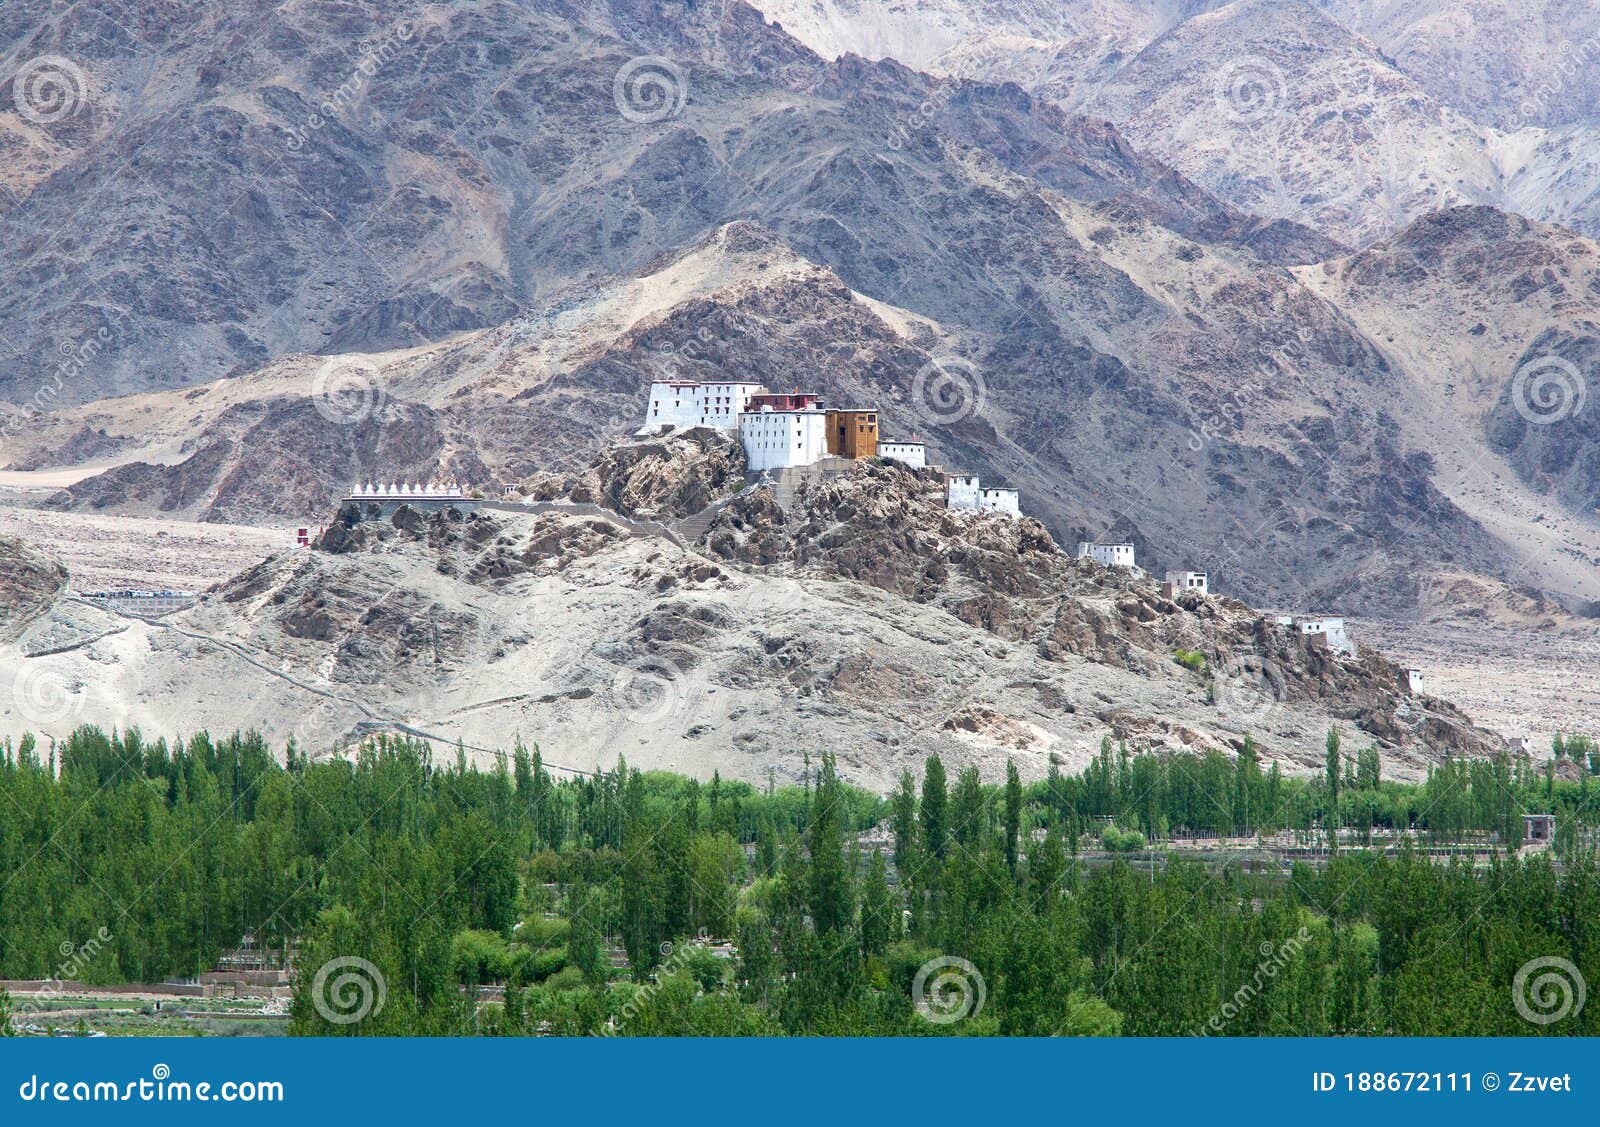 thiksey gompa in ladakh, jammu and kashmir, india. the monastery is located in the indus valley